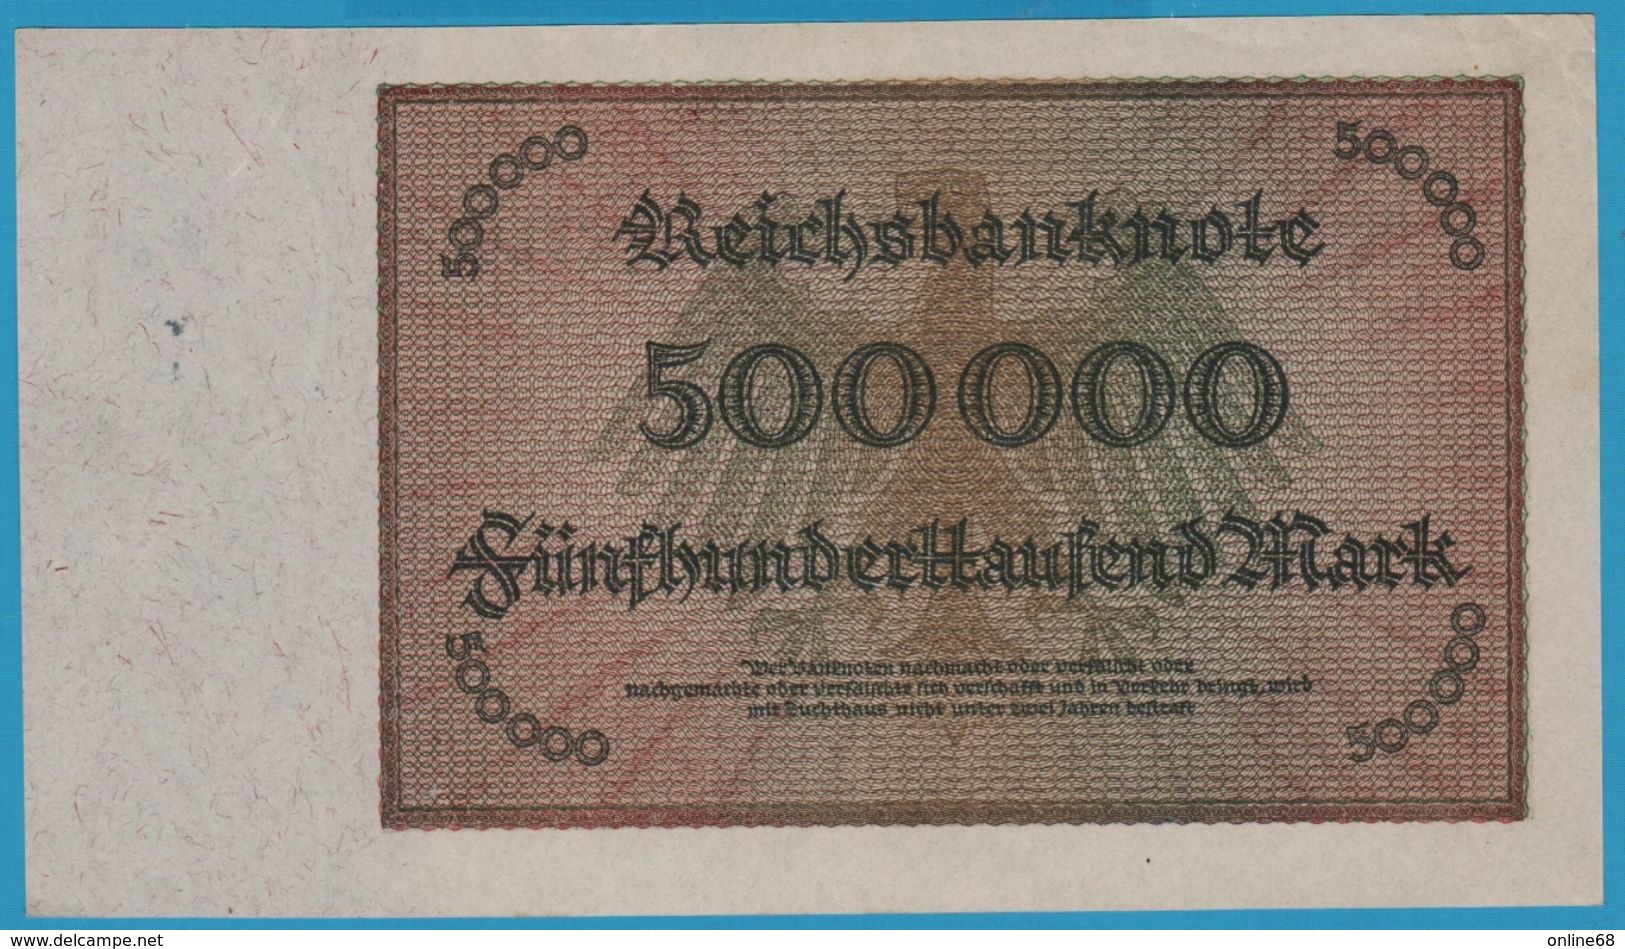 DEUTSCHES REICH 500.000 Mark 01.05.1923 SERIE 35AB.032650 P# 88b Two Serial # On Front Only - 500.000 Mark